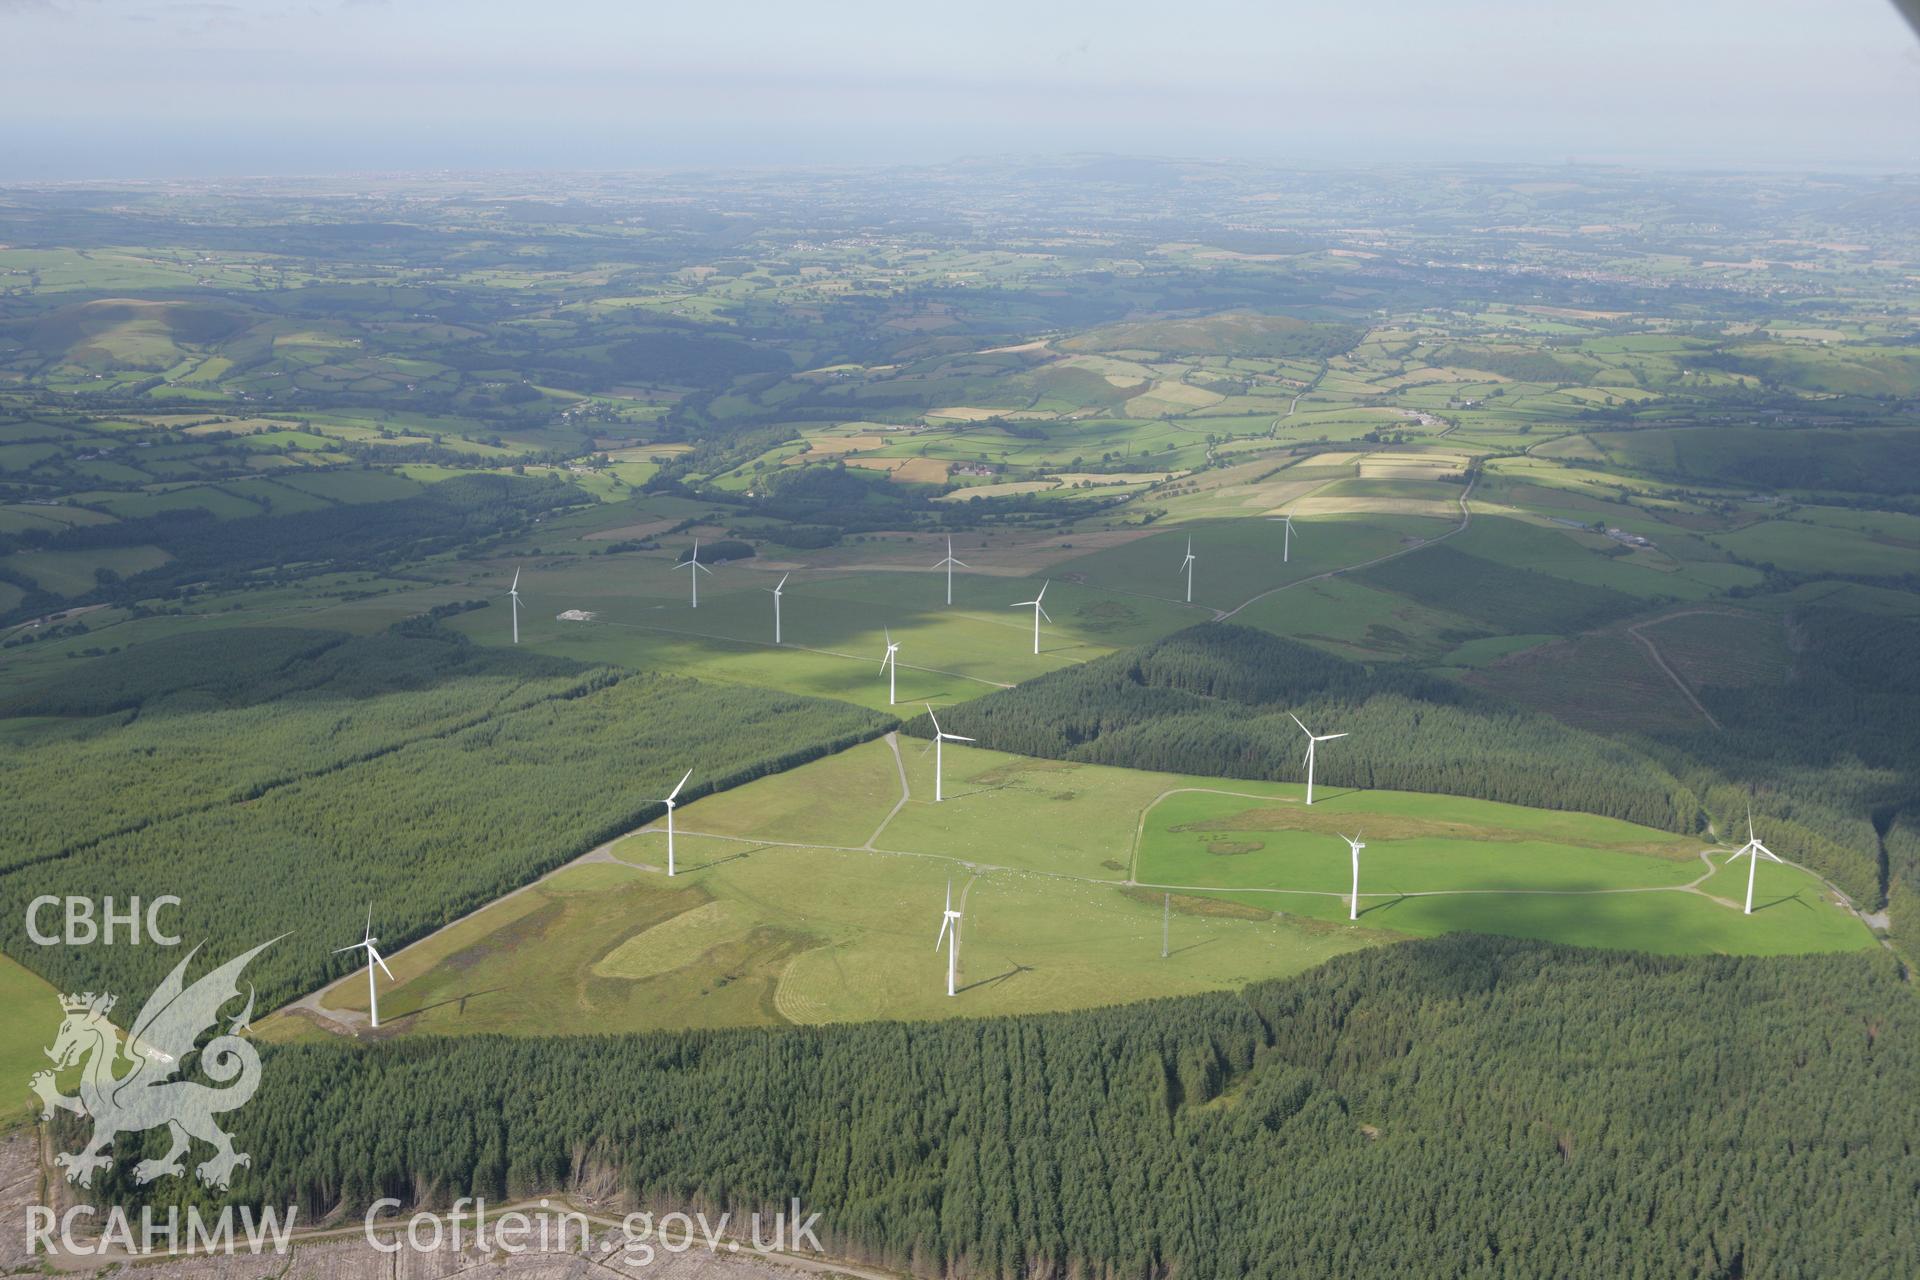 RCAHMW colour oblique aerial photograph of Tir Mostyn Windfarm. Taken on 31 July 2007 by Toby Driver